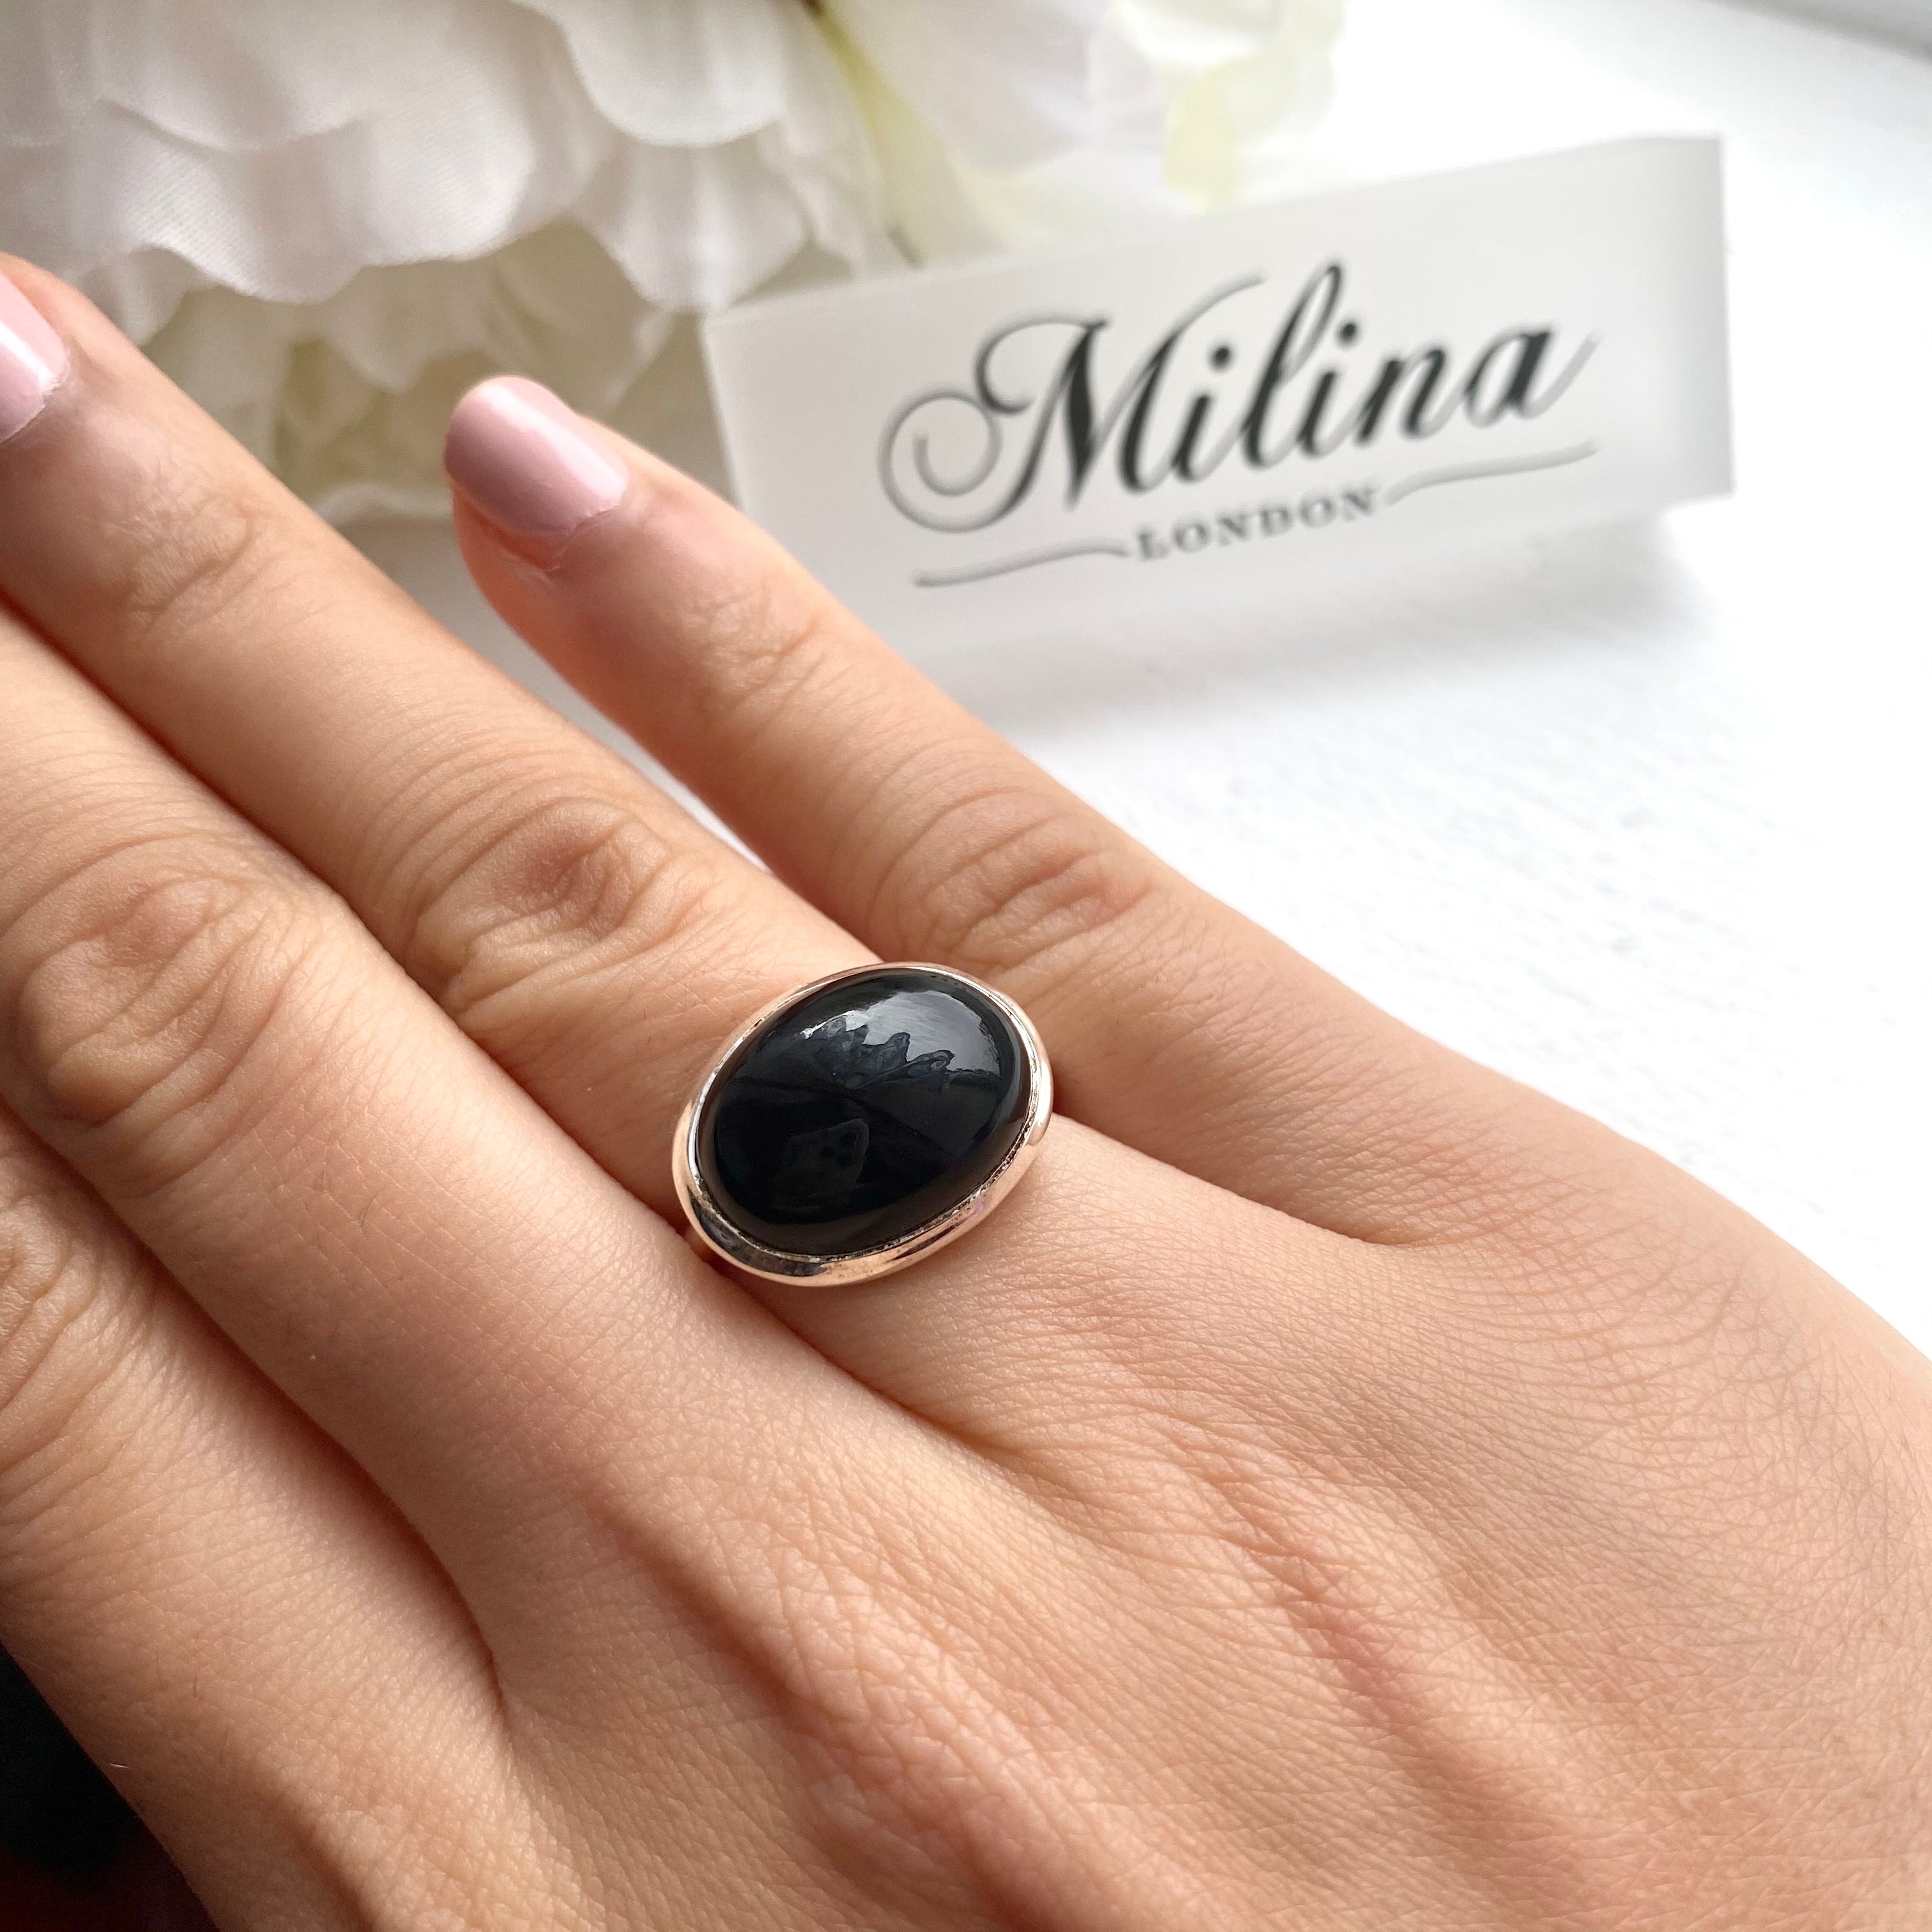 Cabochon Oval Cut Natural Gemstone Sterling Silver Ring - Black Onyx